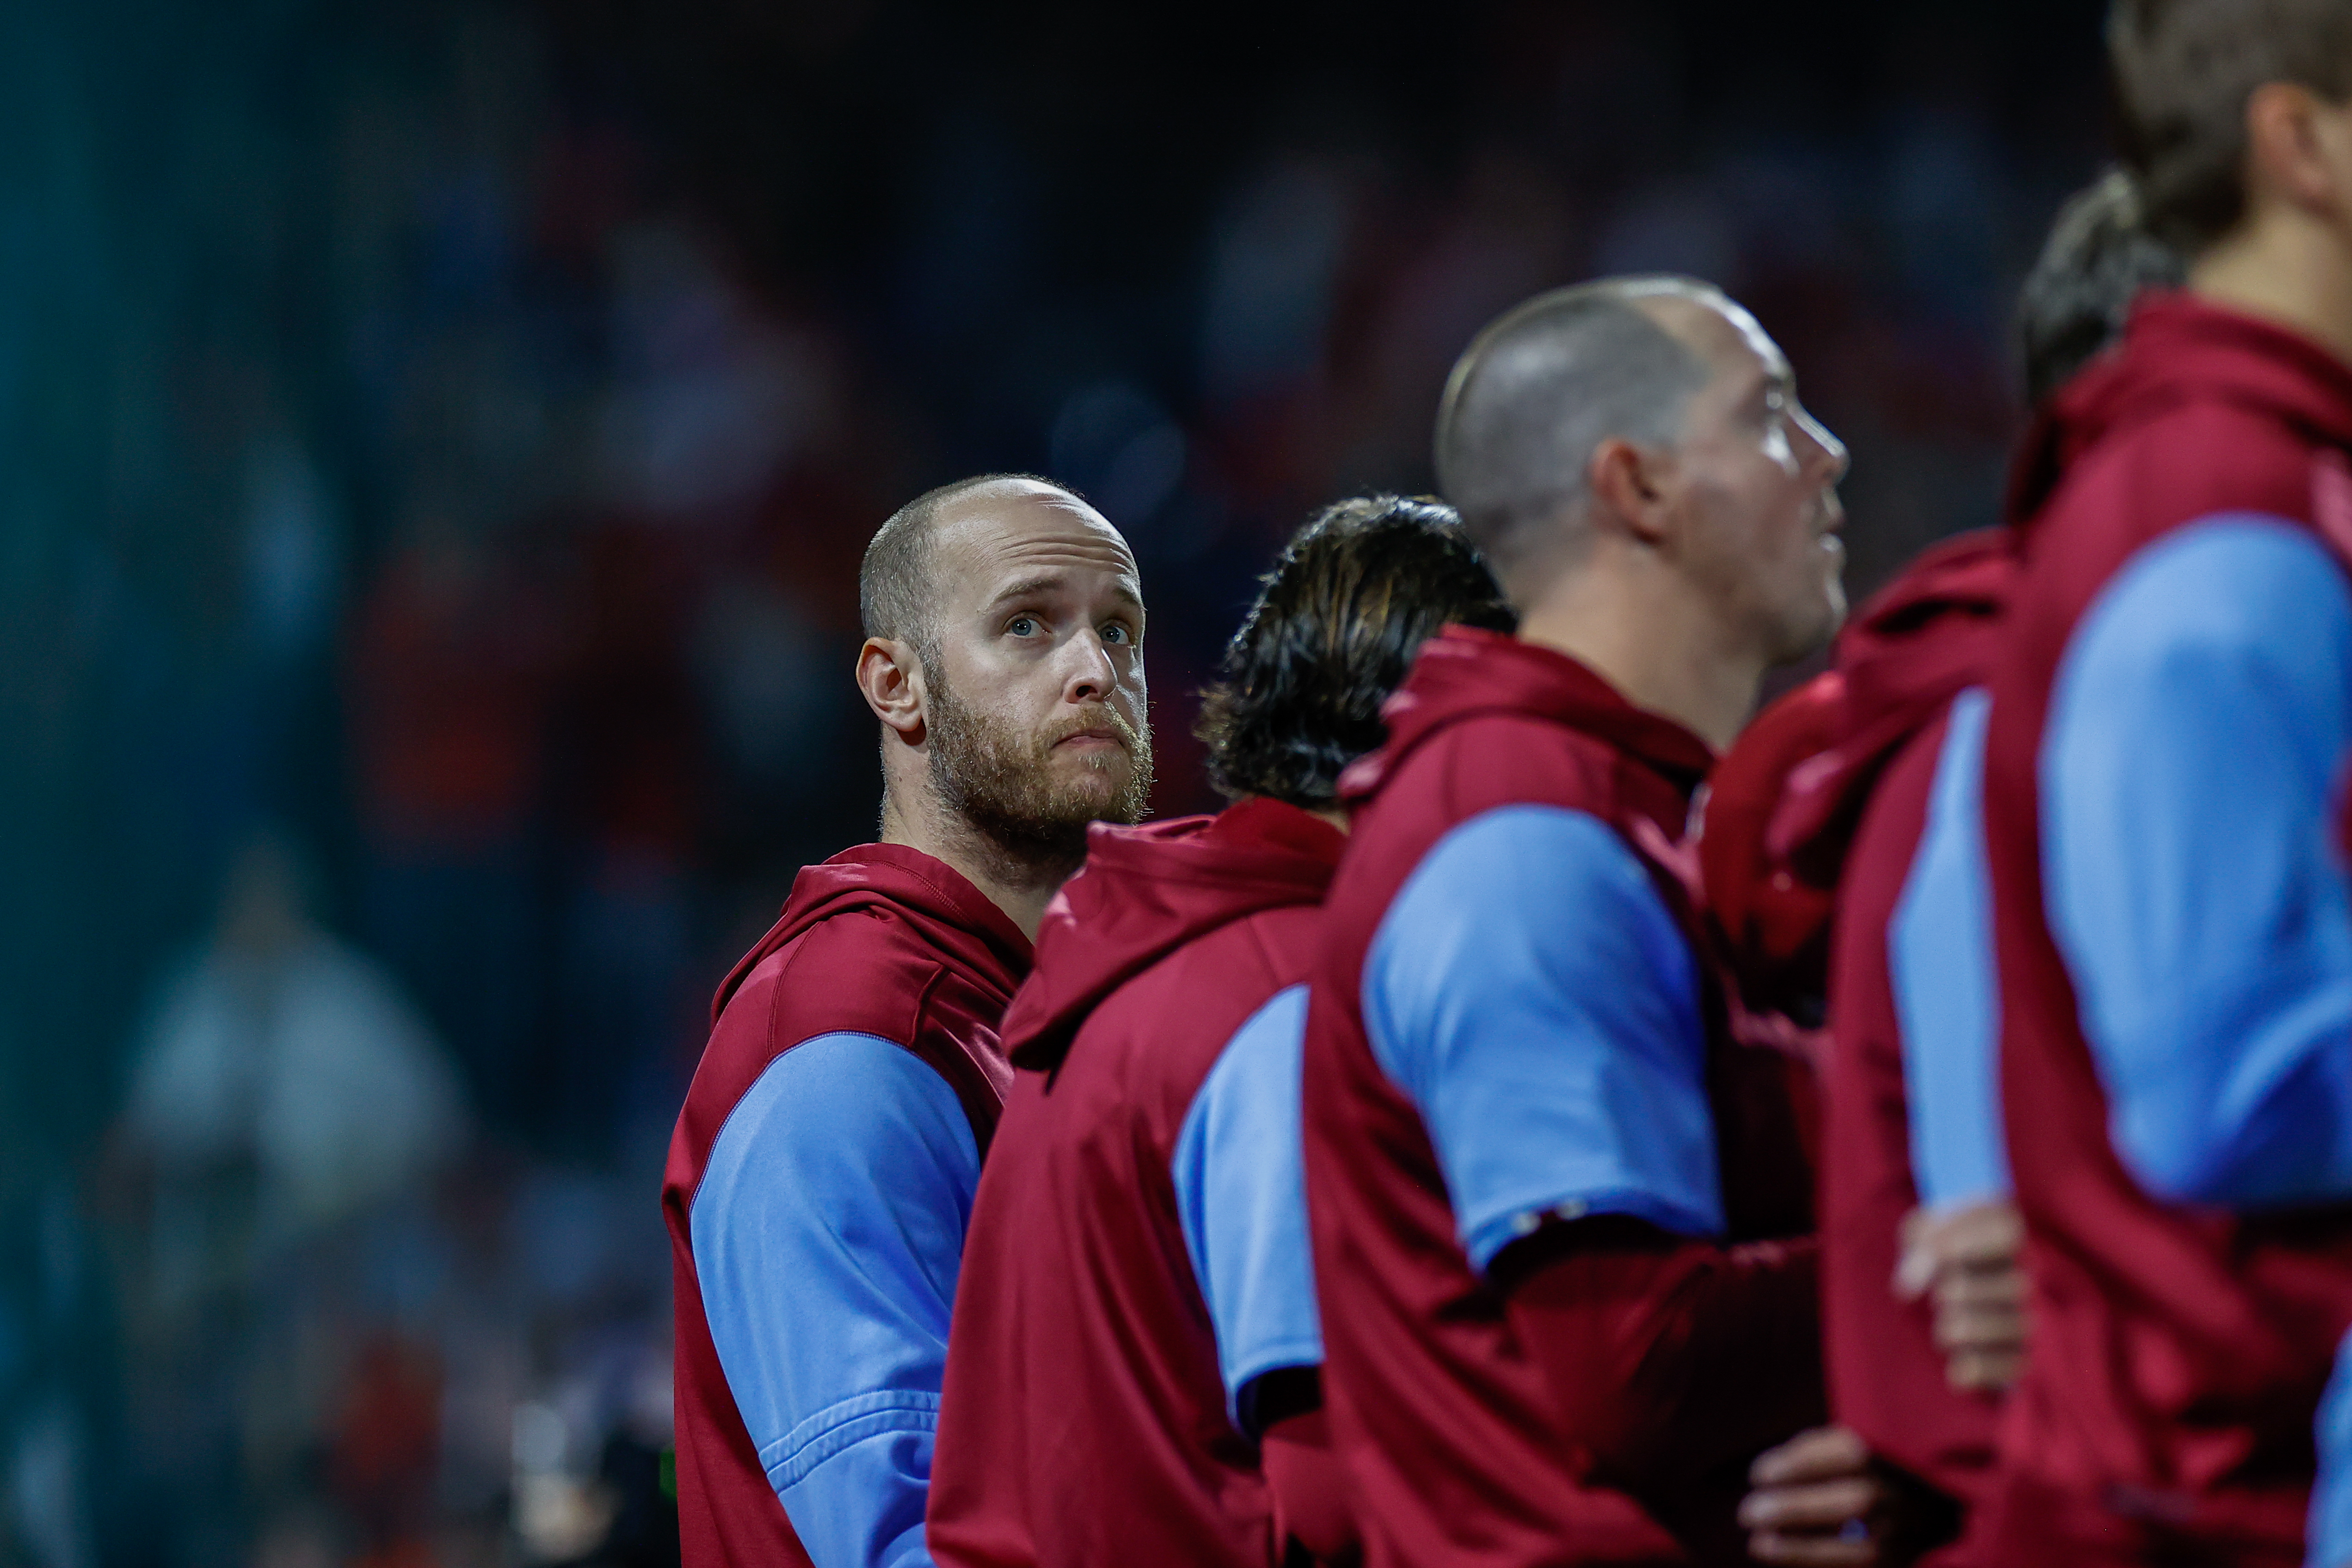 Phillies World Series: Zack Wheeler says Game 6 success will come